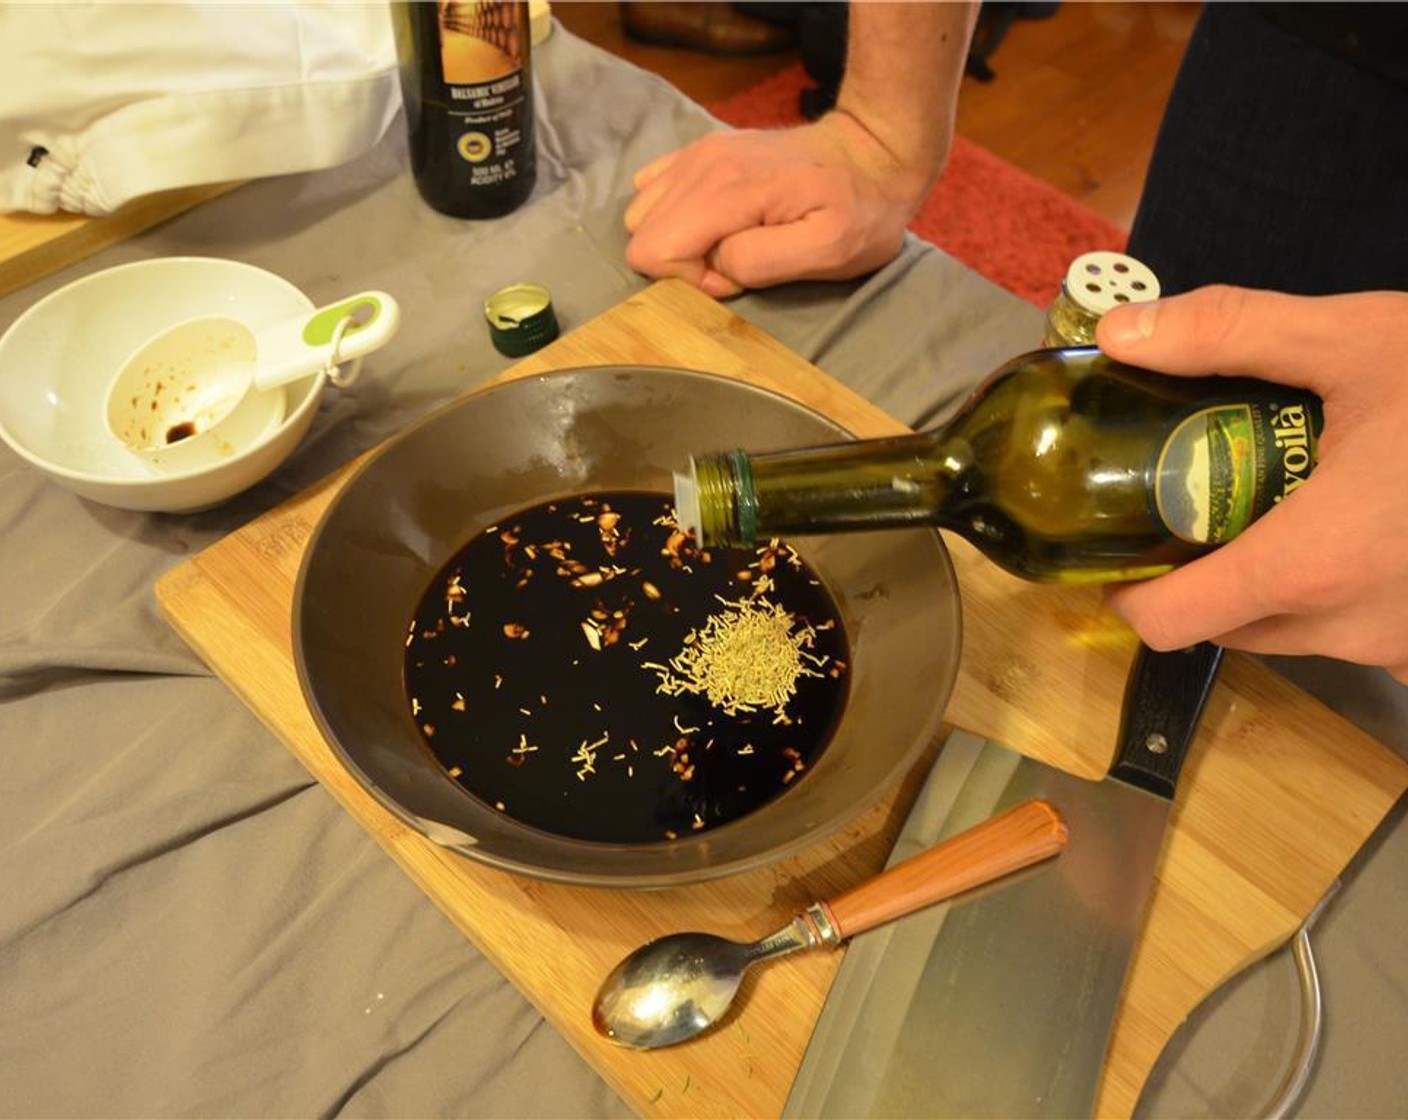 step 2 In a medium bowl, combine Balsamic Vinegar (1 cup), Minced Garlic, Olive Oil (1/4 cup) and Dried Rosemary (1 tsp).